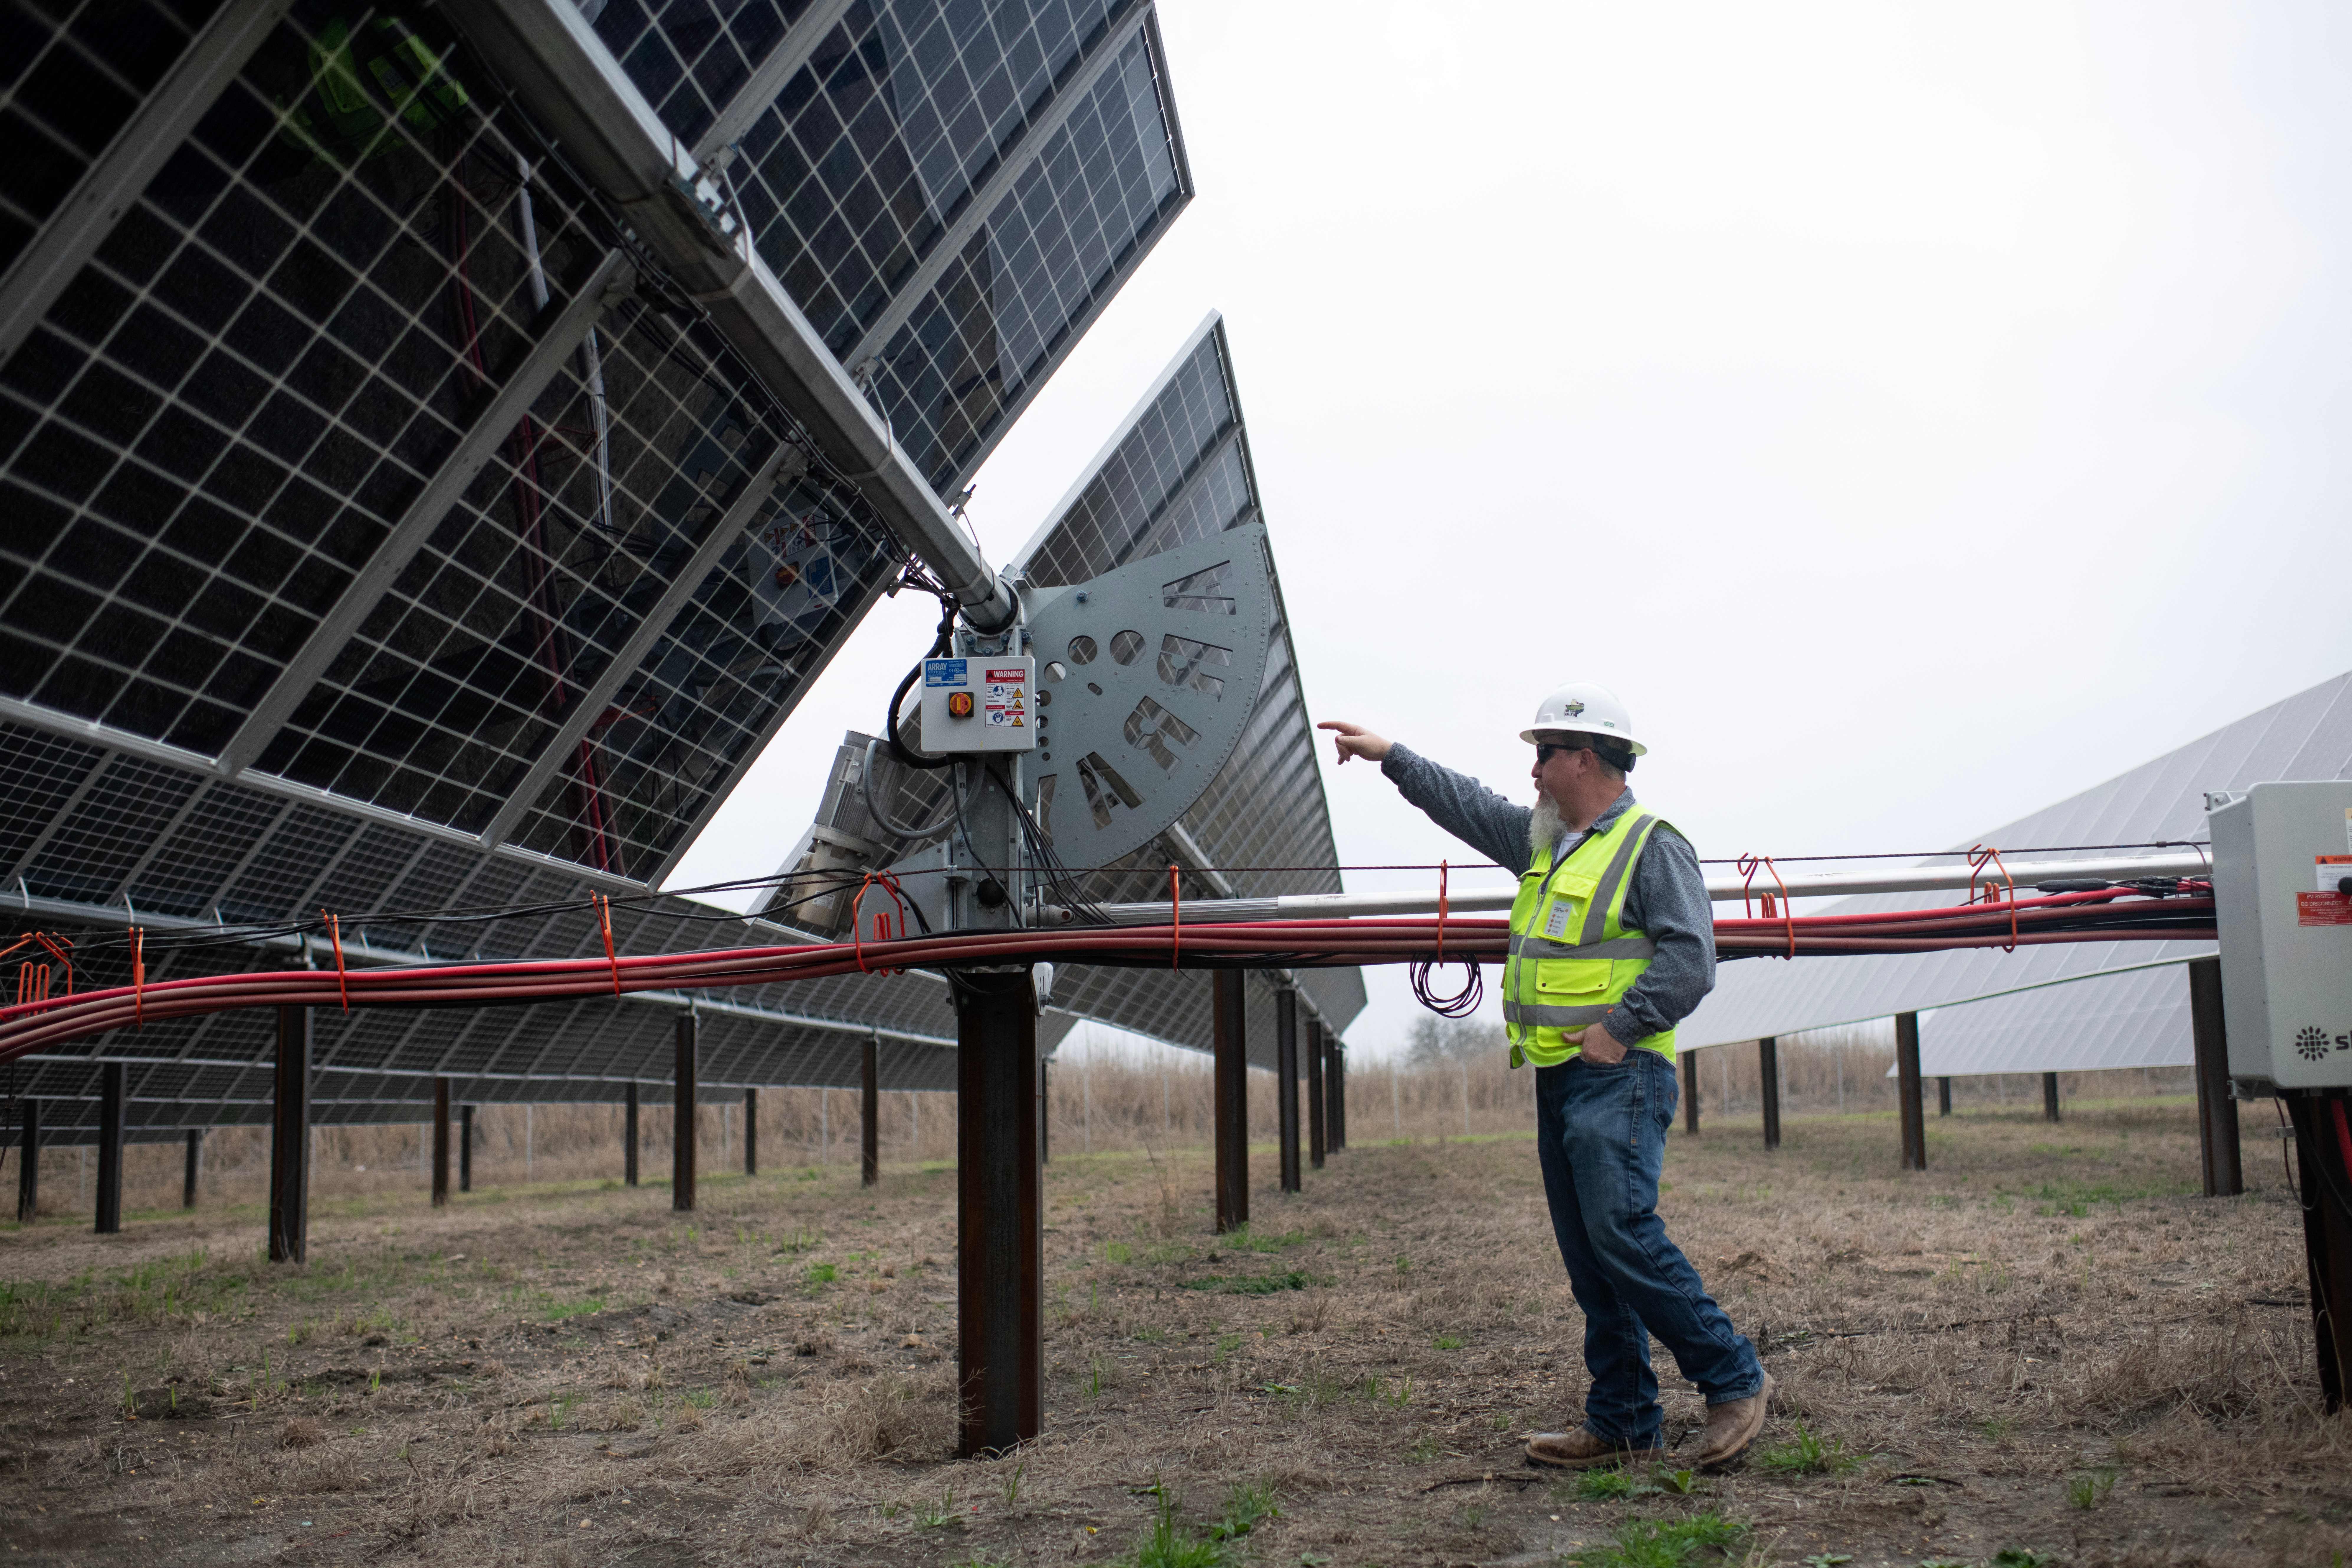 Buy this renewable energy stock that has as much as 47% upside, UBS says